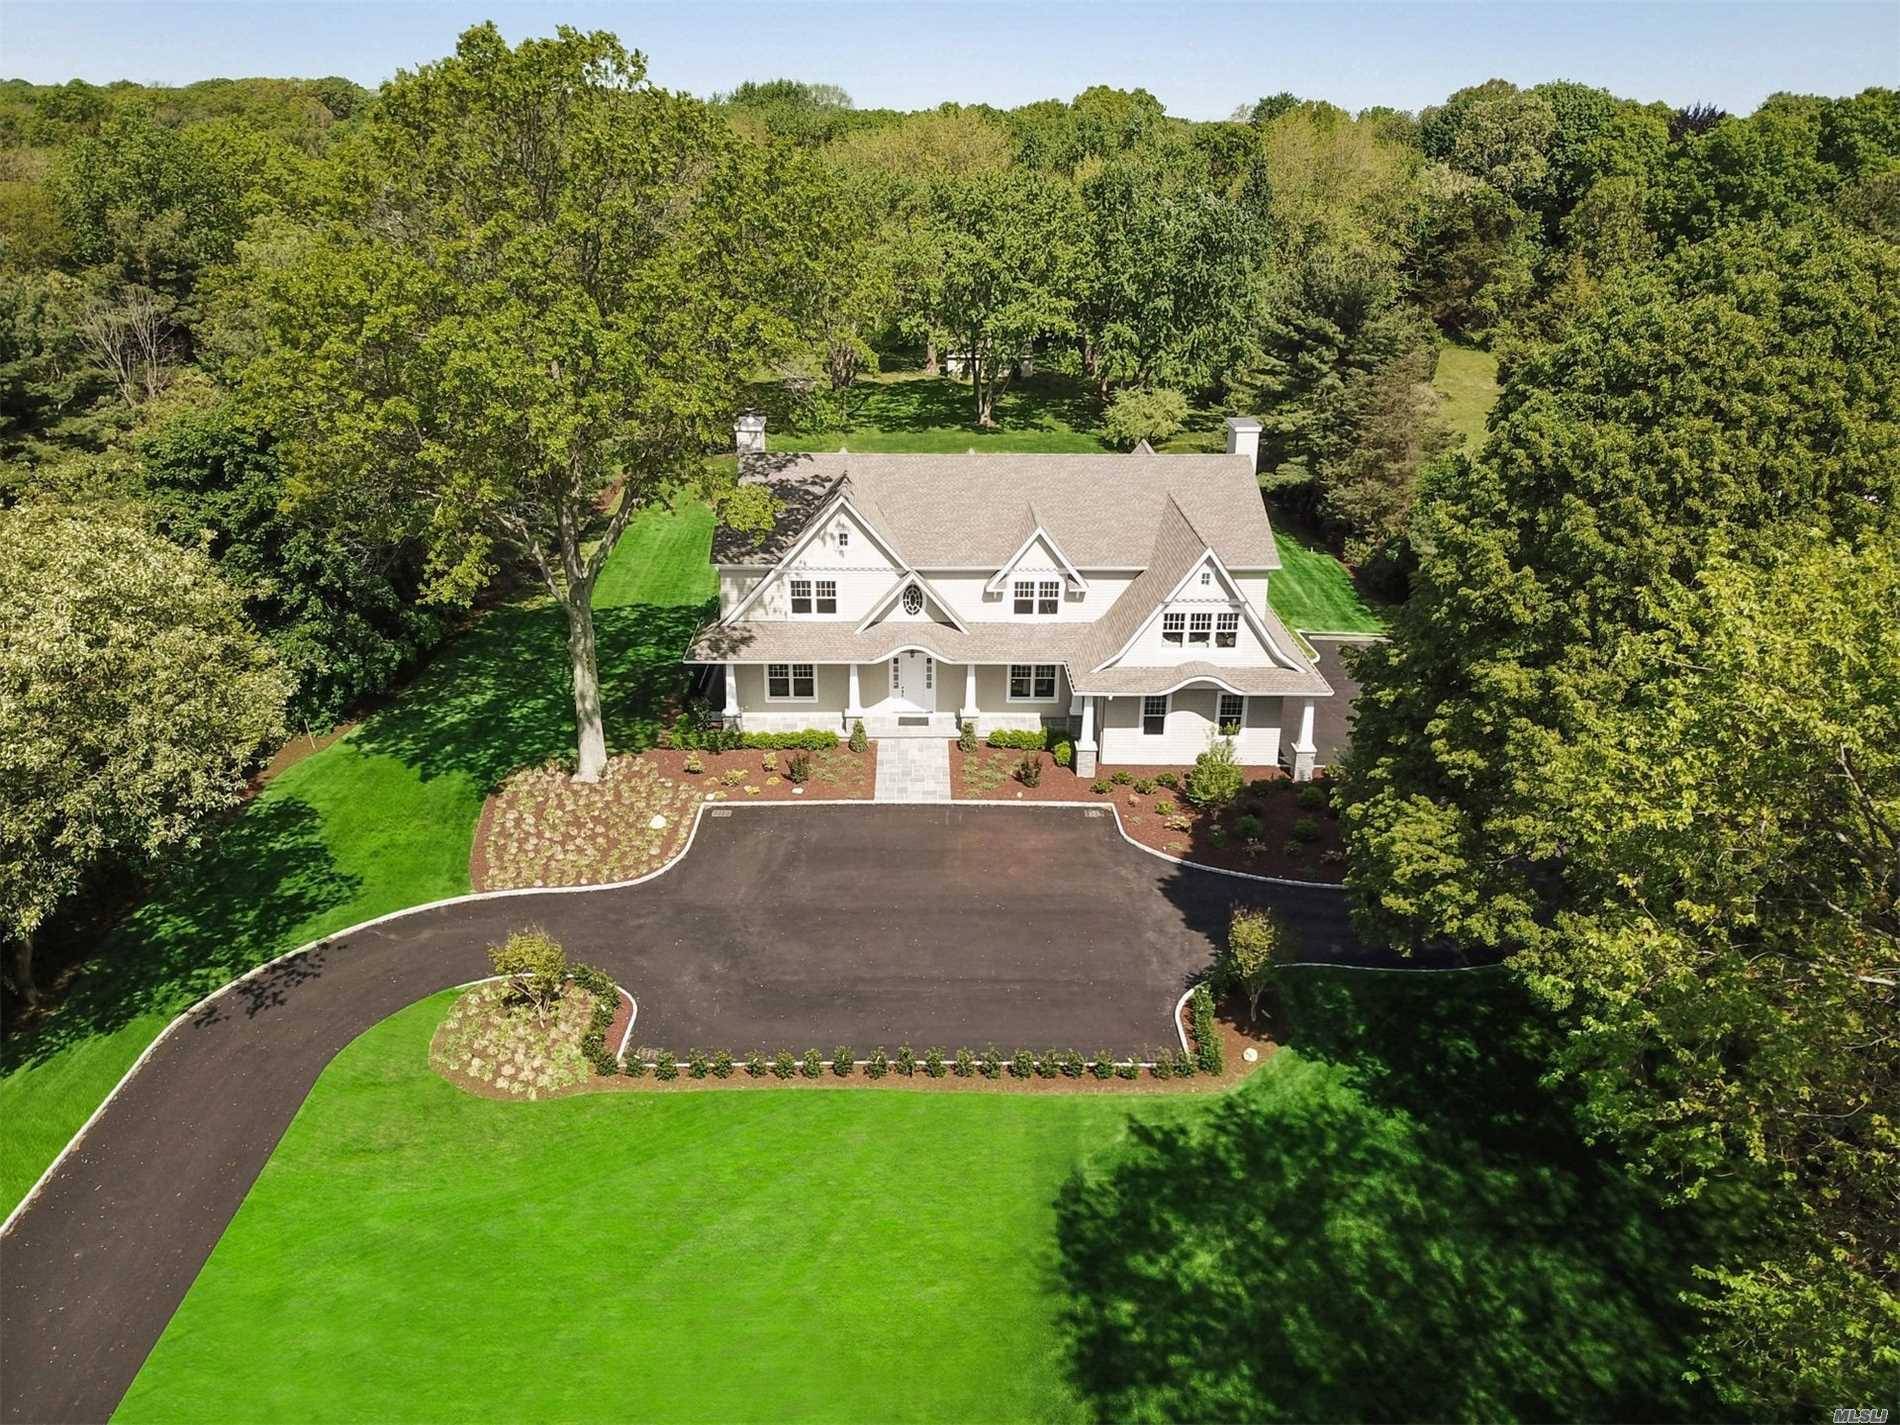 Magazine Worthy 2019 Grand Hampton's Style Colonial With 2 Story Entry Foyer On Magnificent Level 2 Acre Lot Built By Renowned Local Builder.